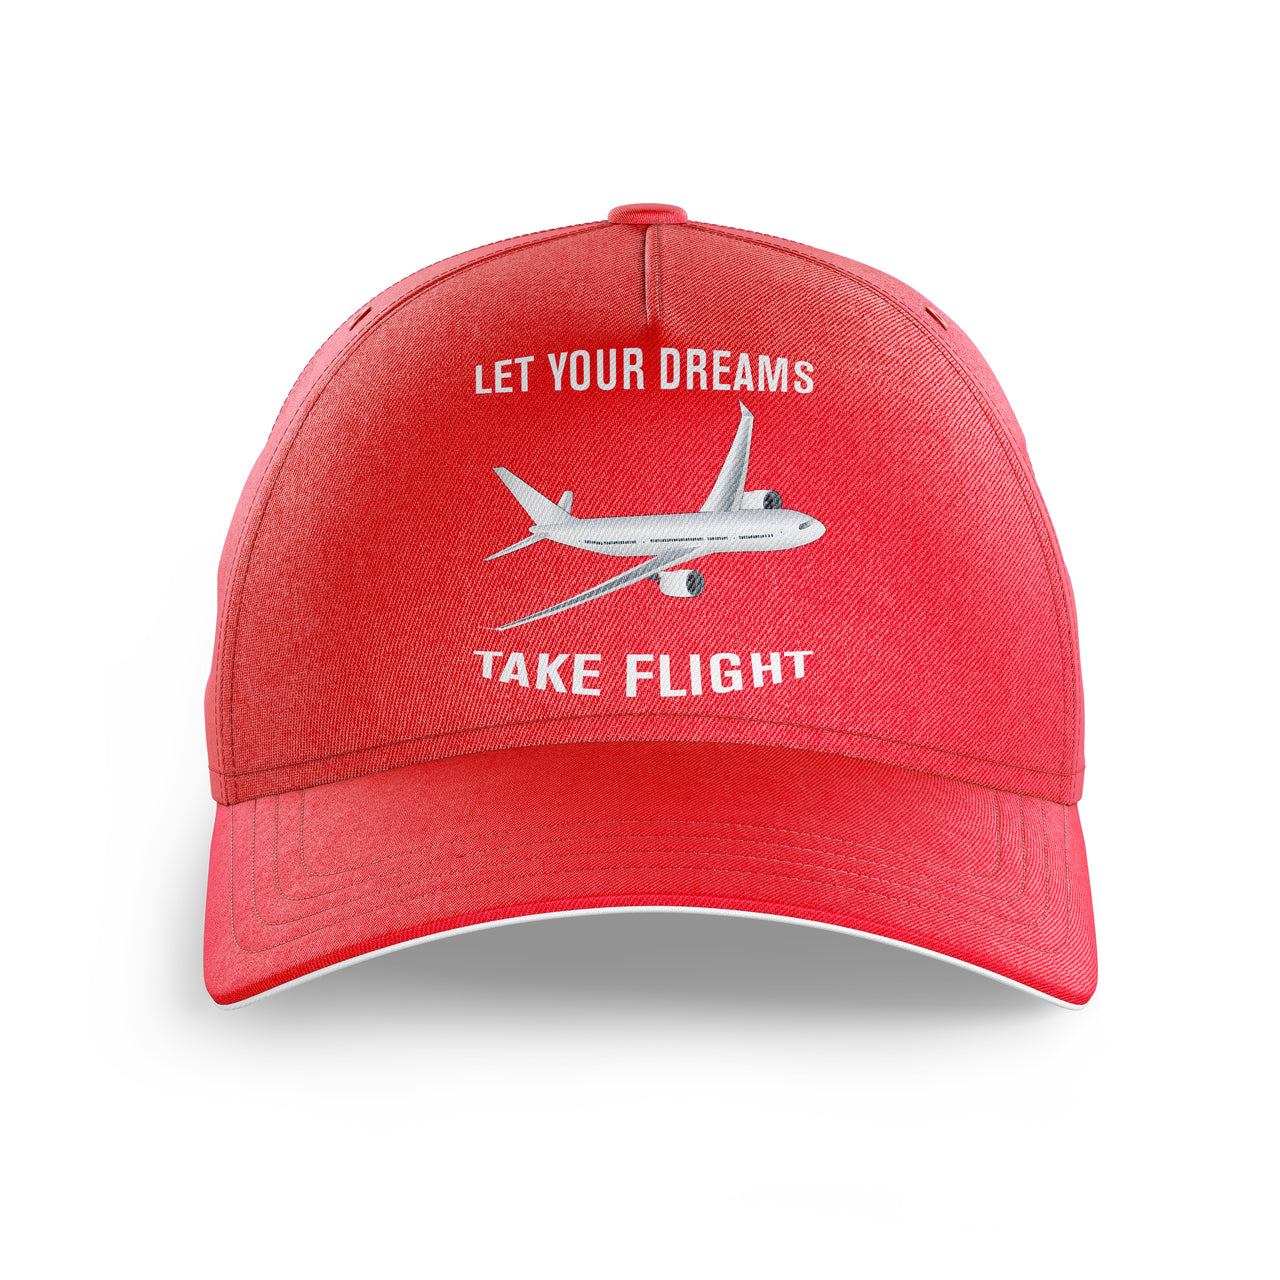 Let Your Dreams Take Flight Printed Hats